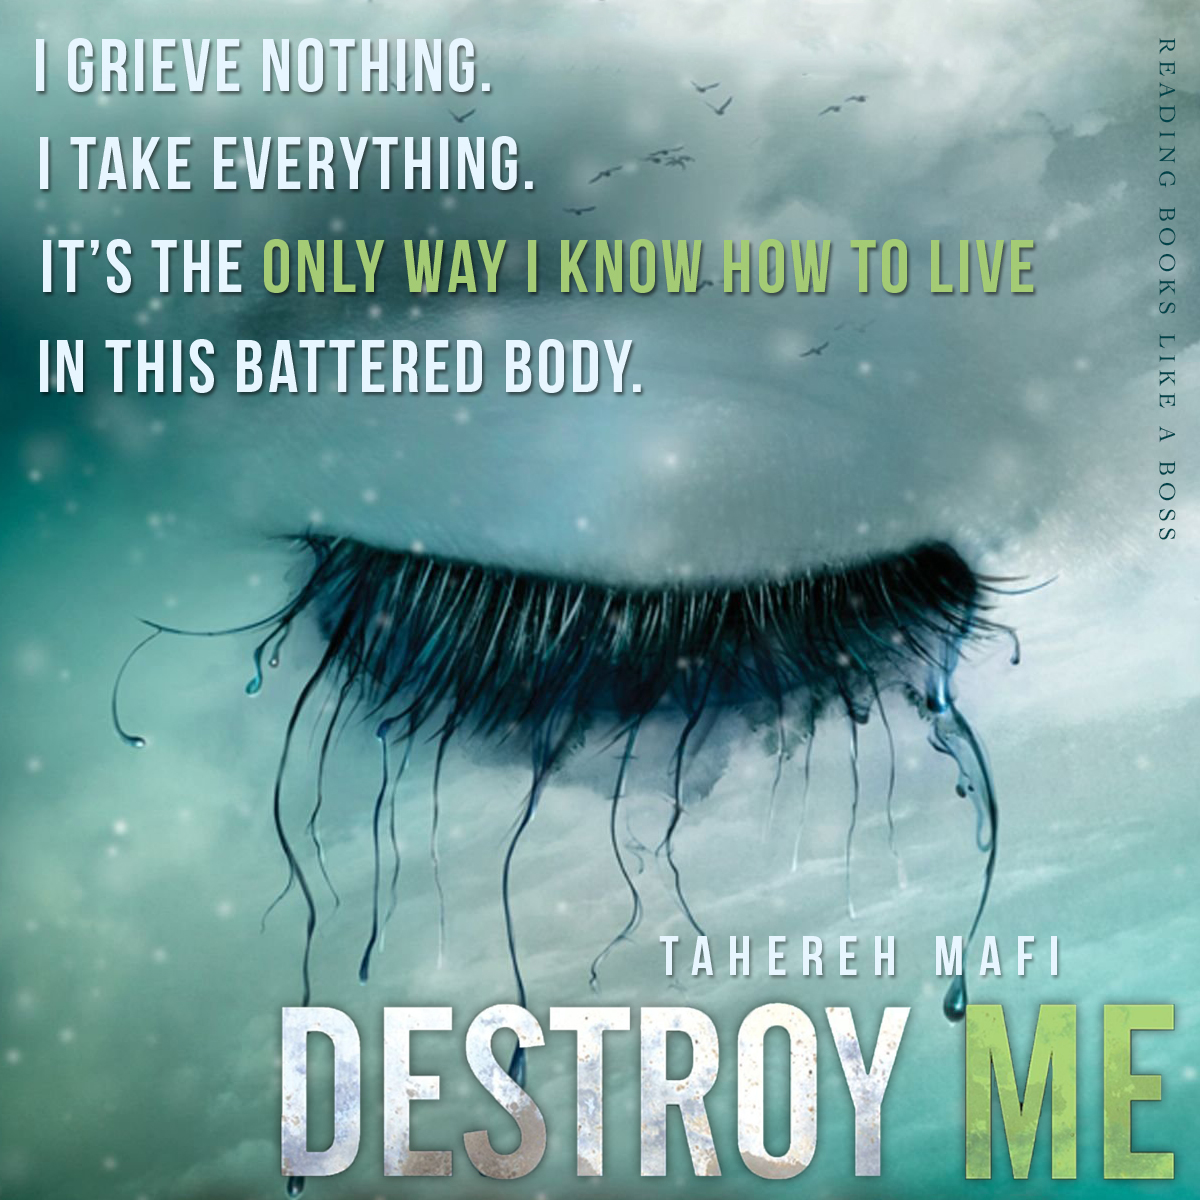 Destroy Me by Tahereh Mafi